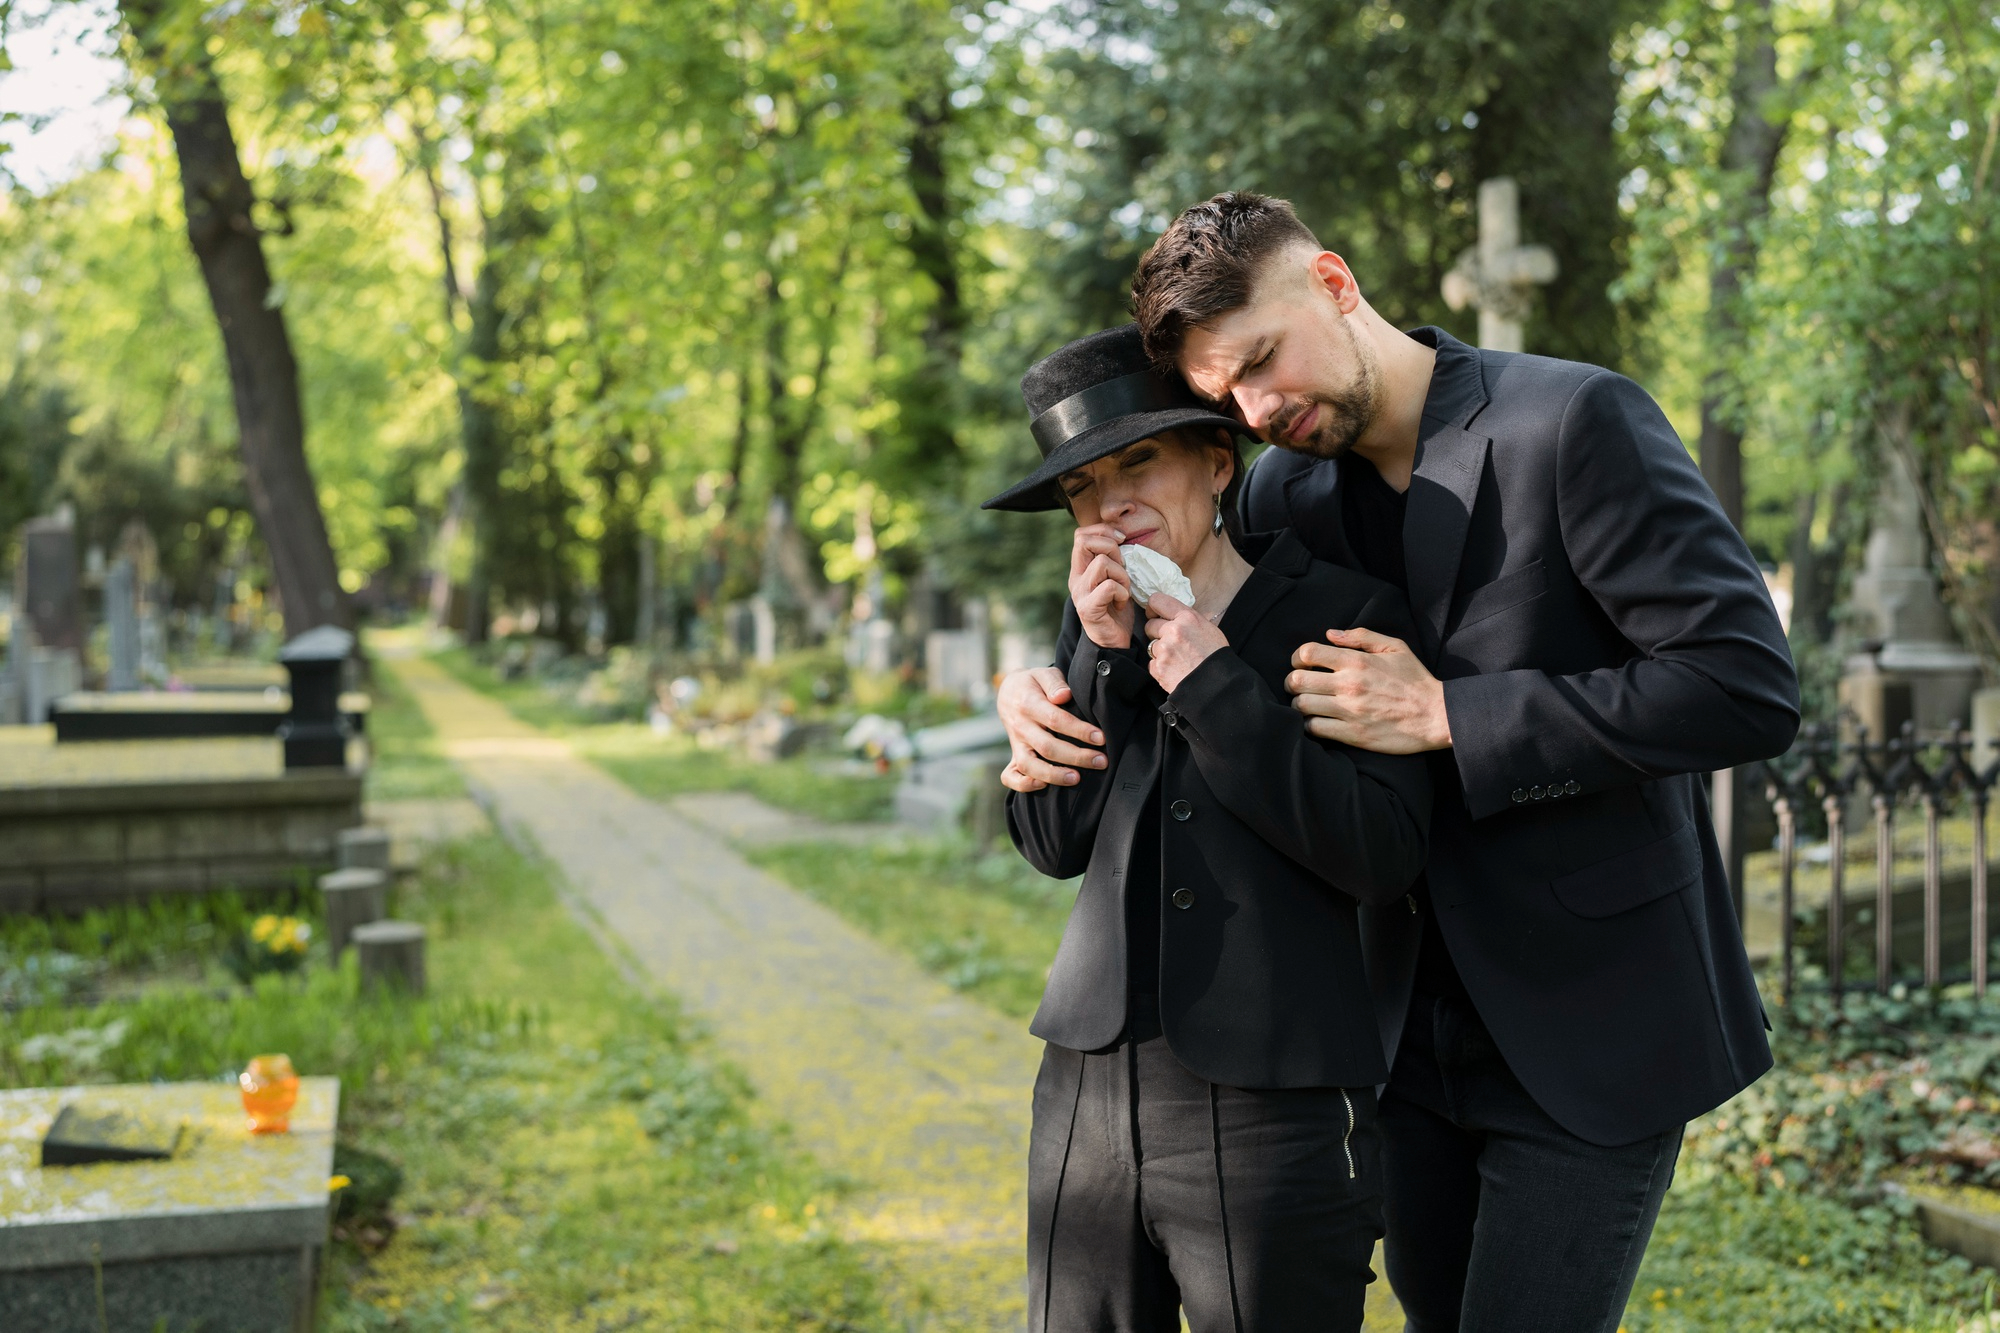 A man consoling a grieving woman in a cemetery | Source: Freepik